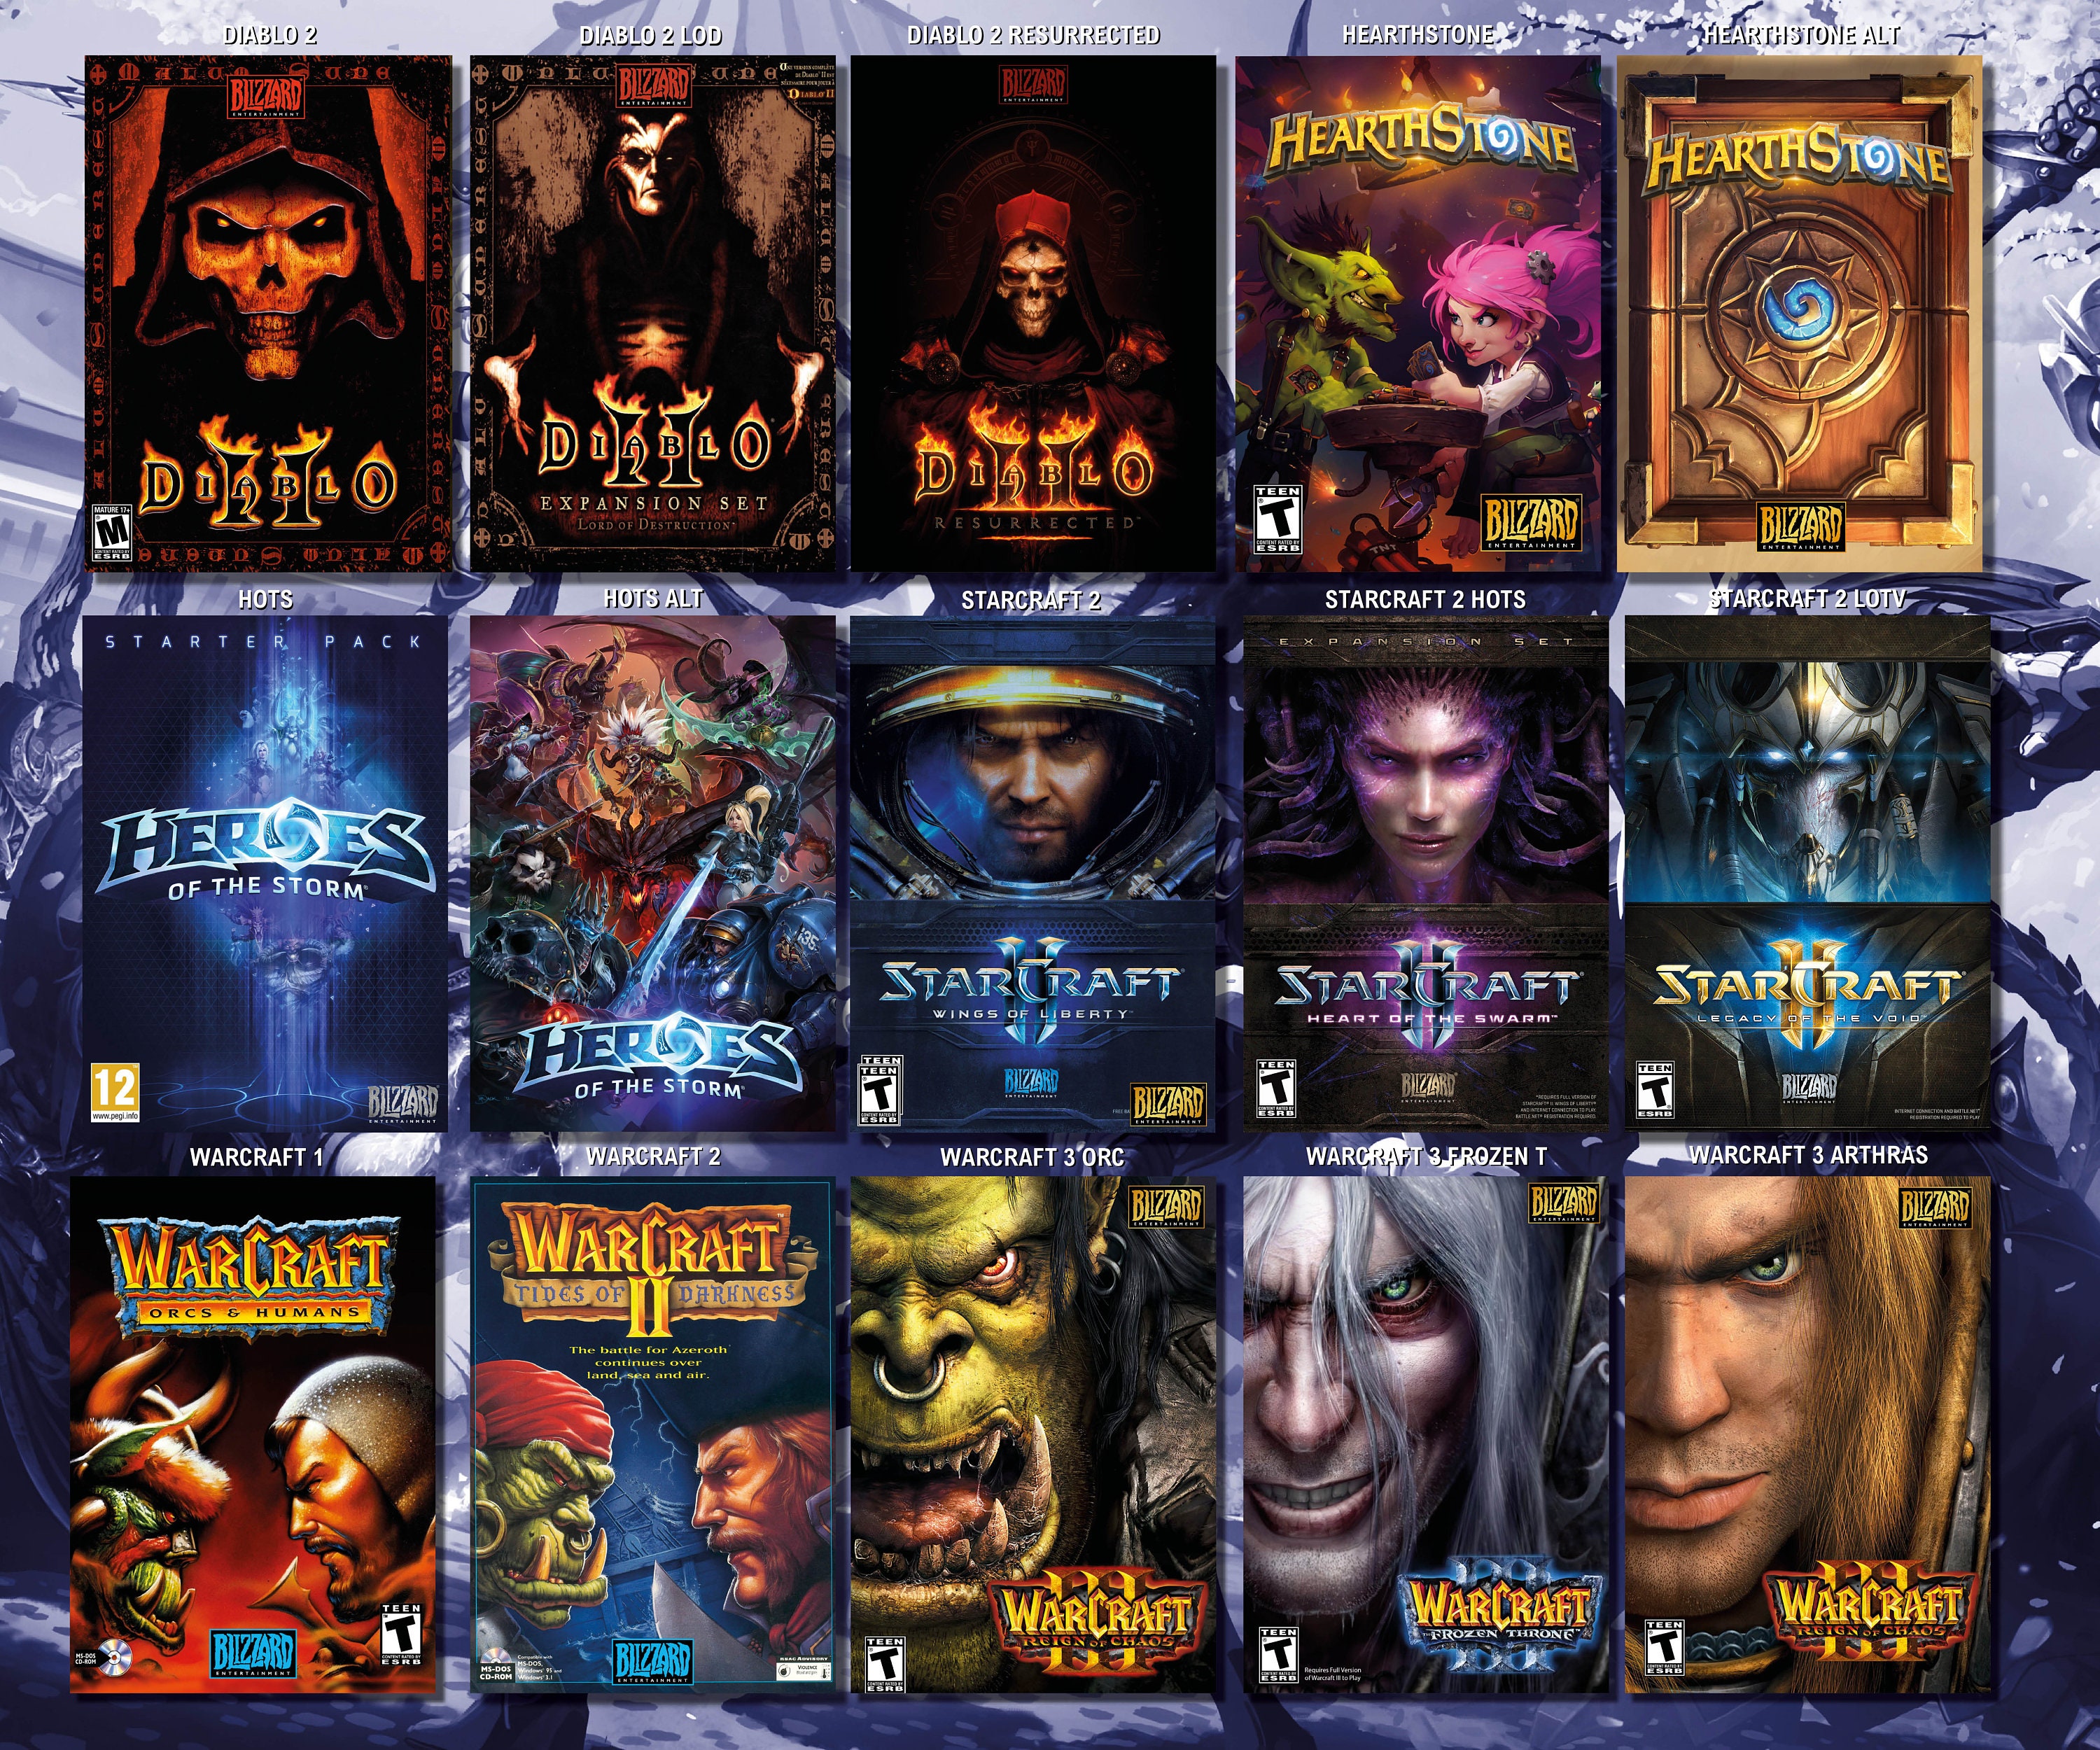 Blizzard Entertainment is ceasing most StarCraft 2 paid